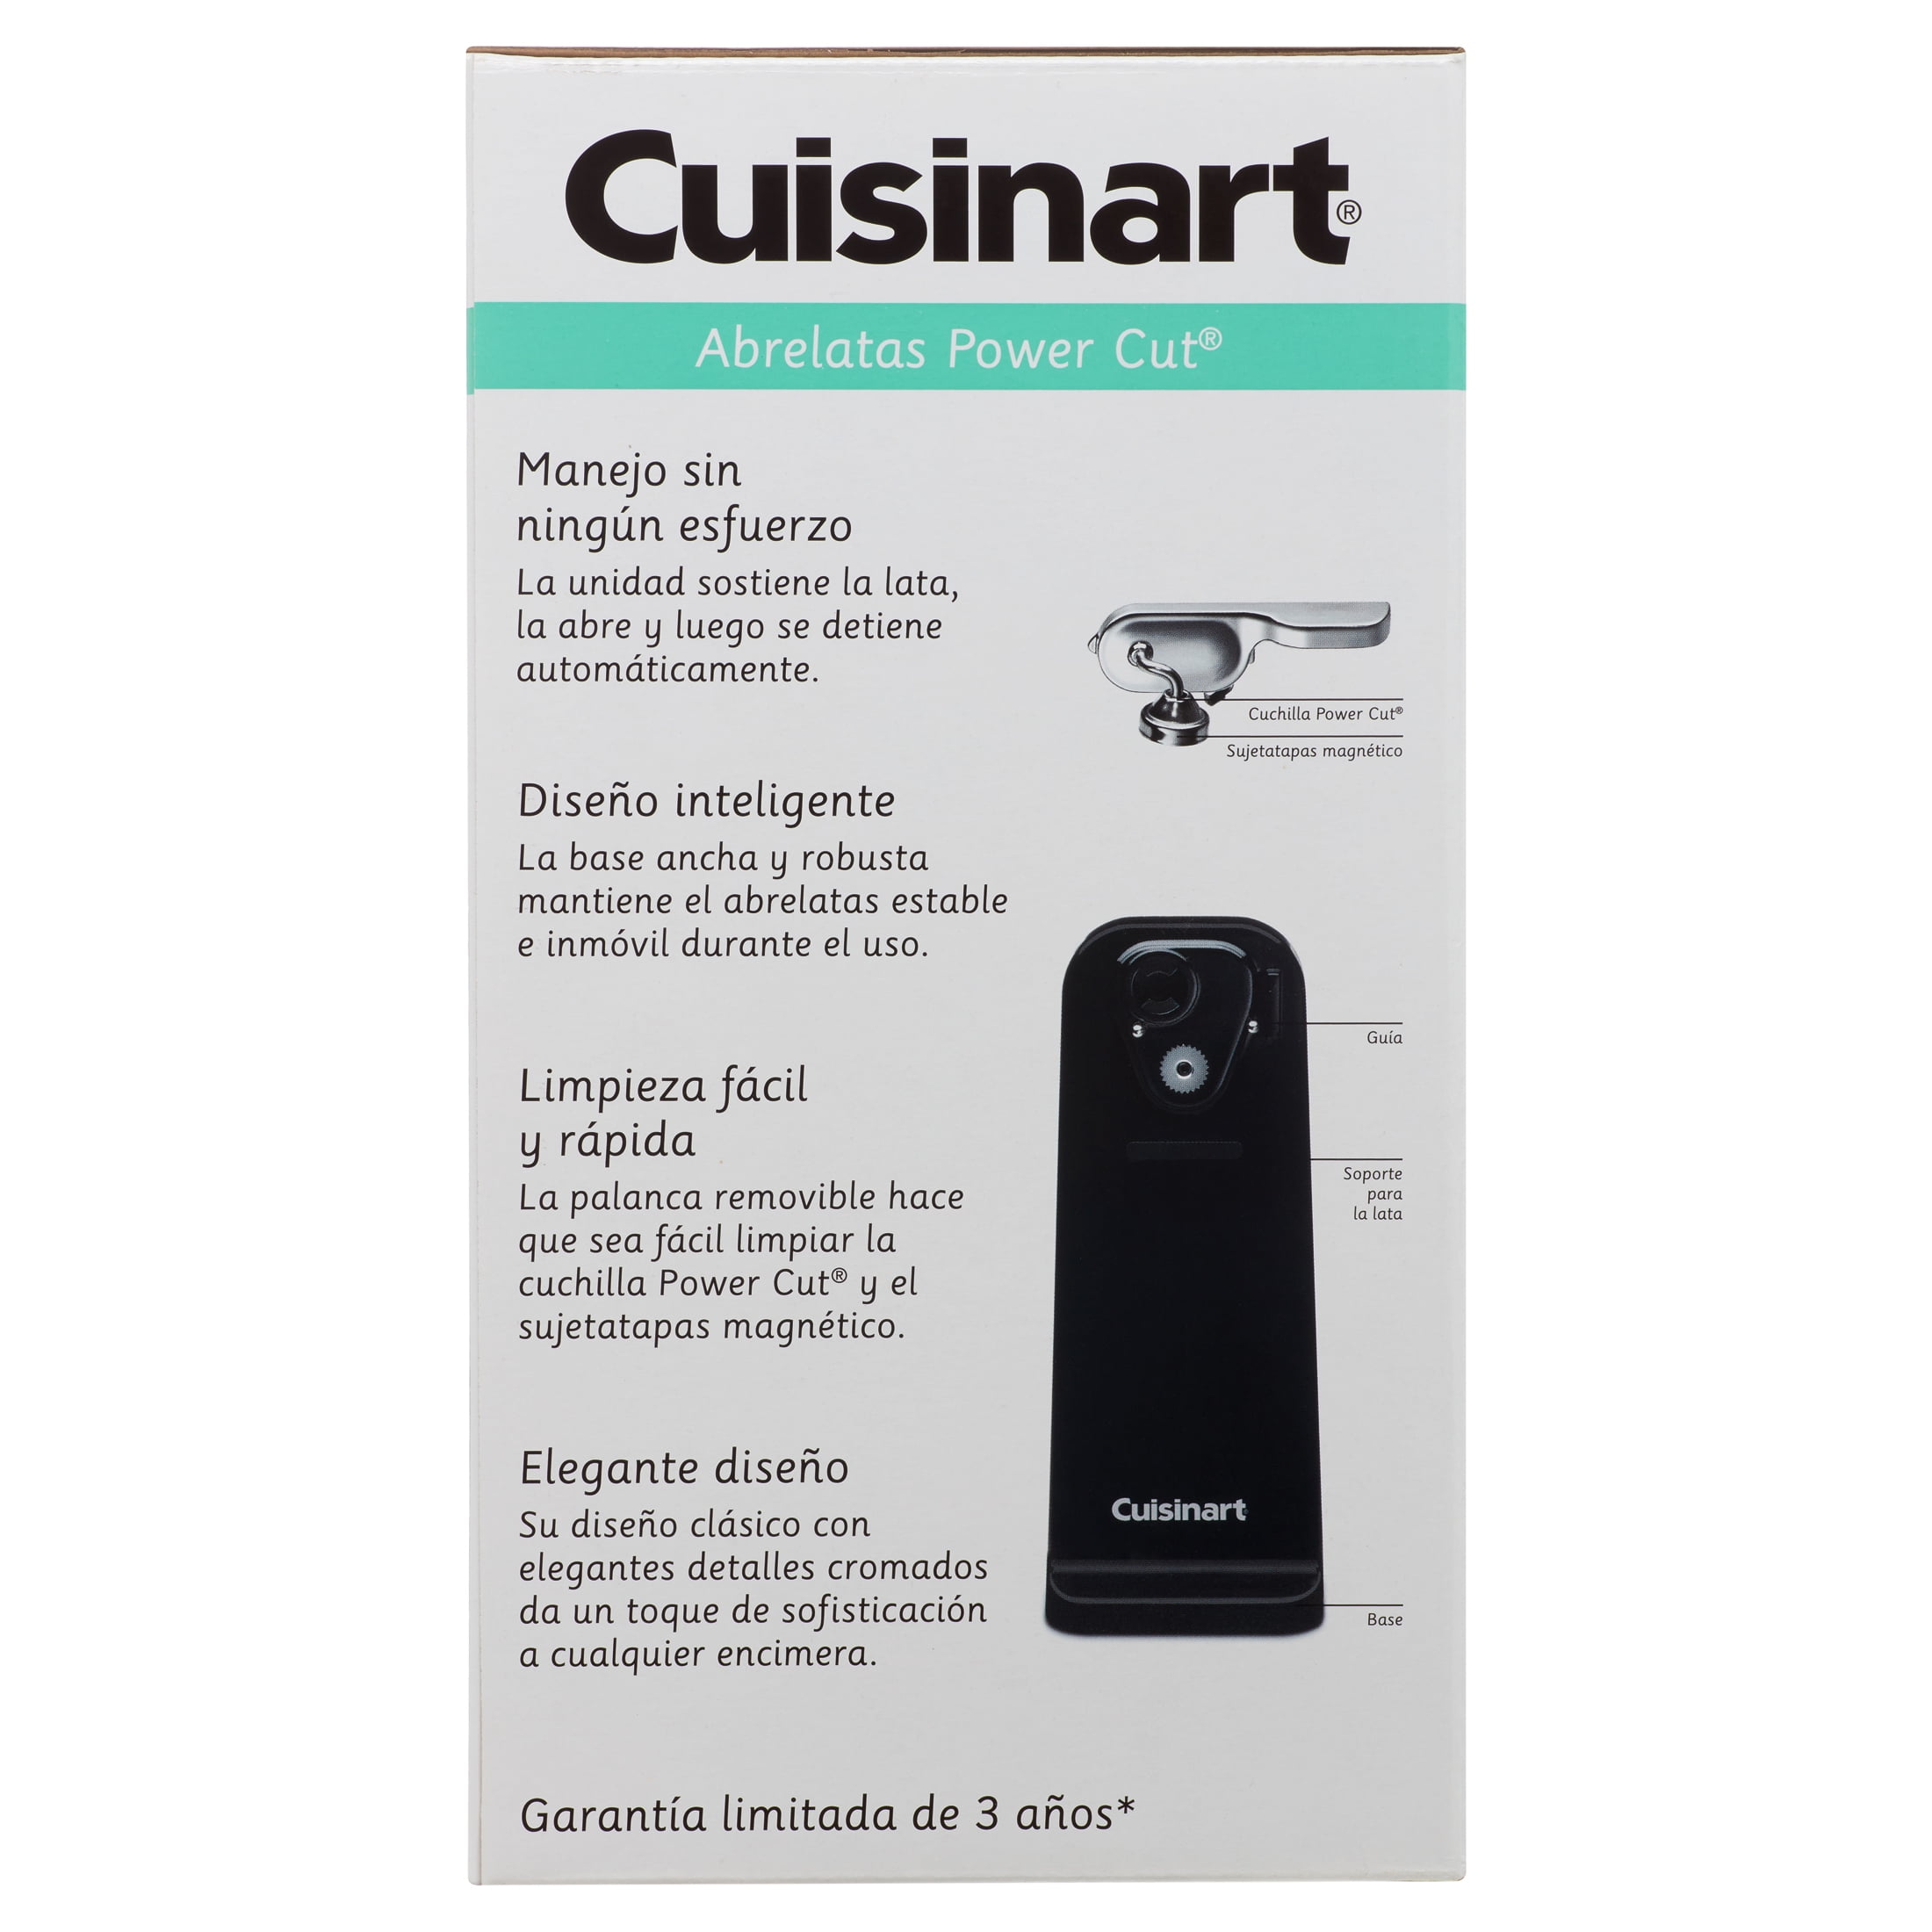 Cuisinart CCO-50BKN Deluxe Electric Can Opener - Black for sale